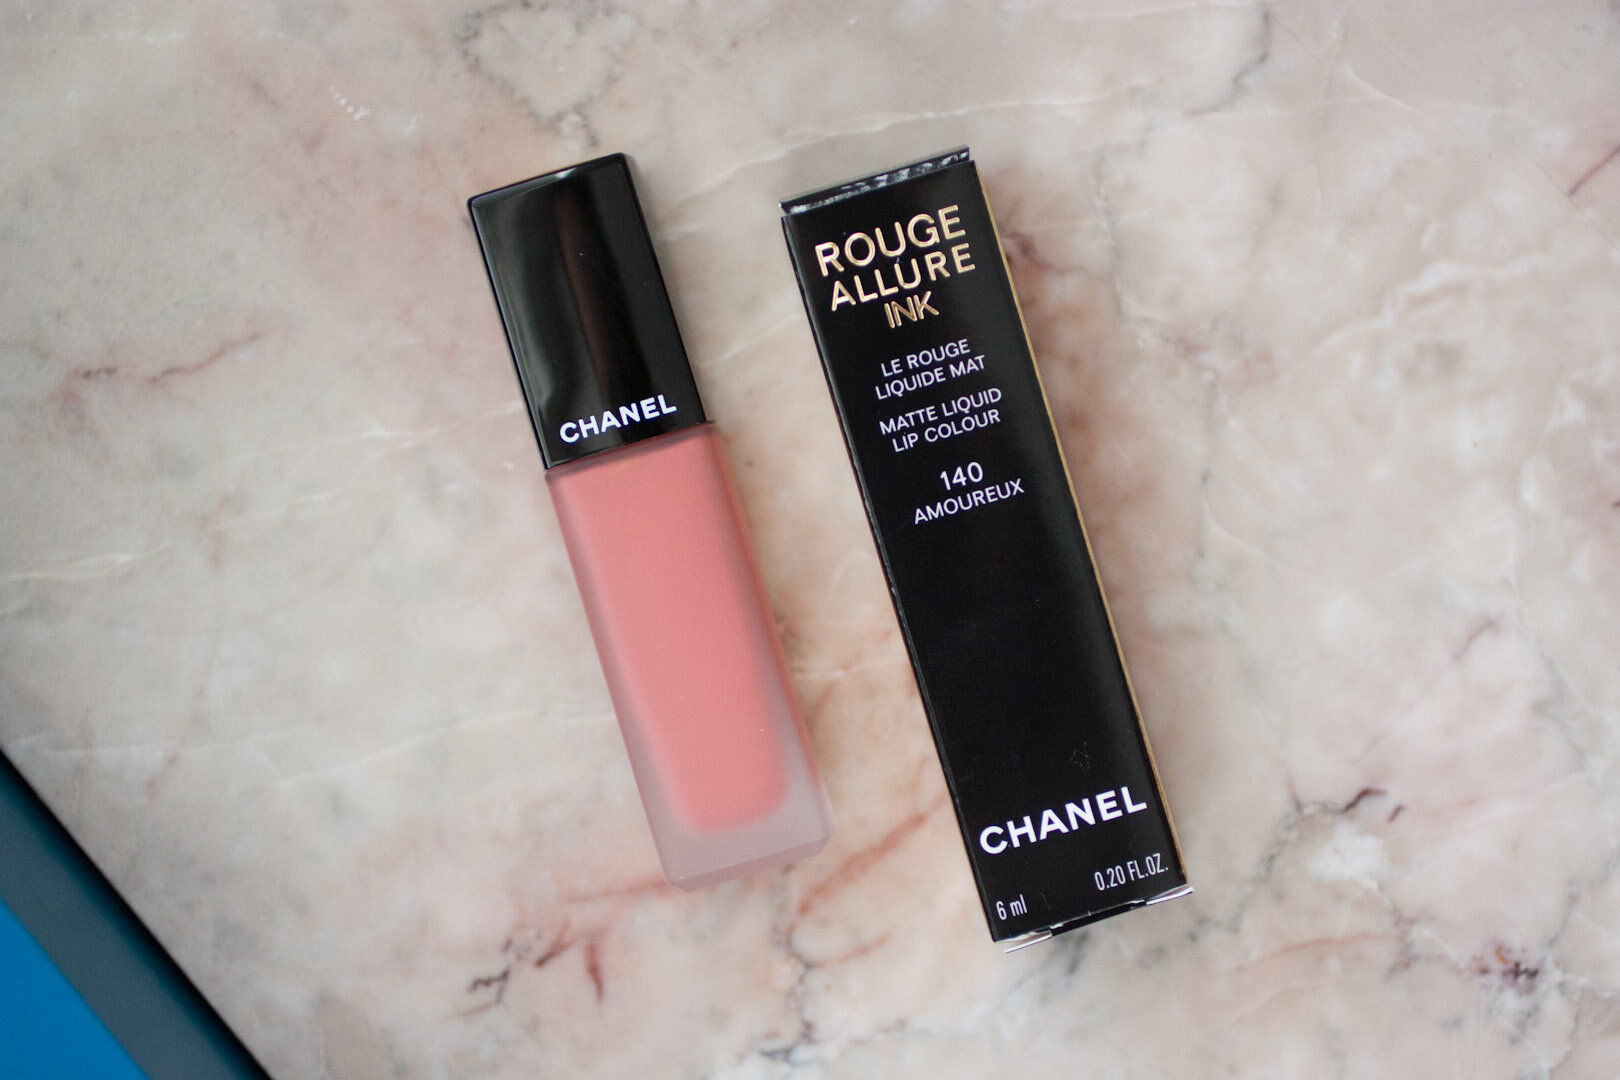 Contra la voluntad apodo Hacia abajo Chanel Rouge Allure Ink Amoureux — a thoughtful take on beauty and style